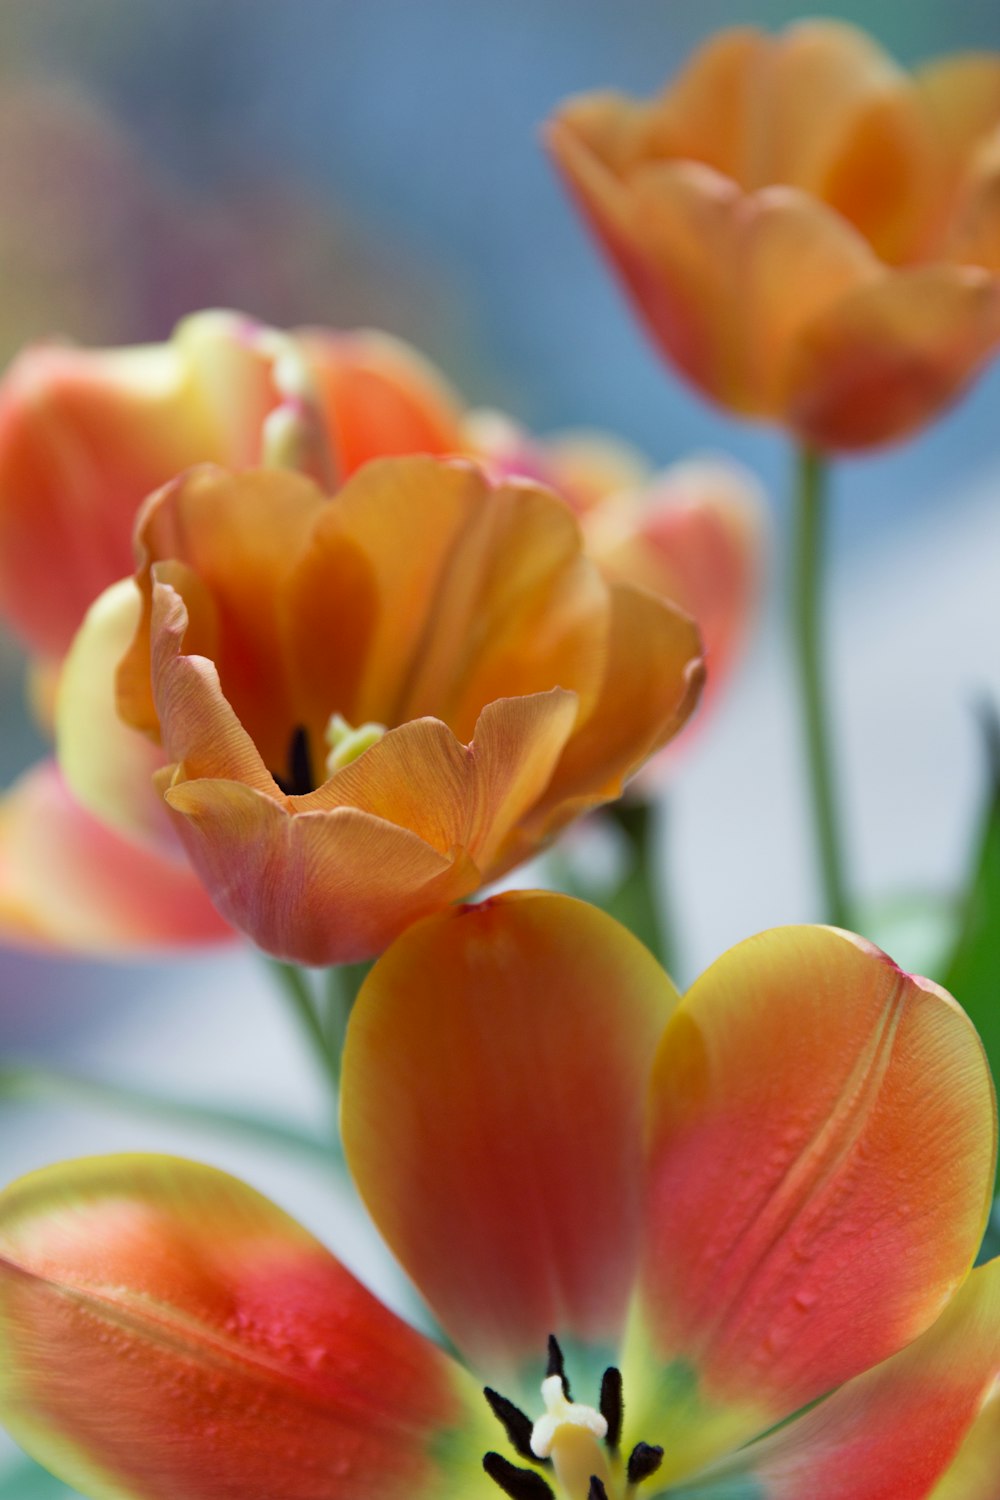 orange and yellow tulips in bloom during daytime